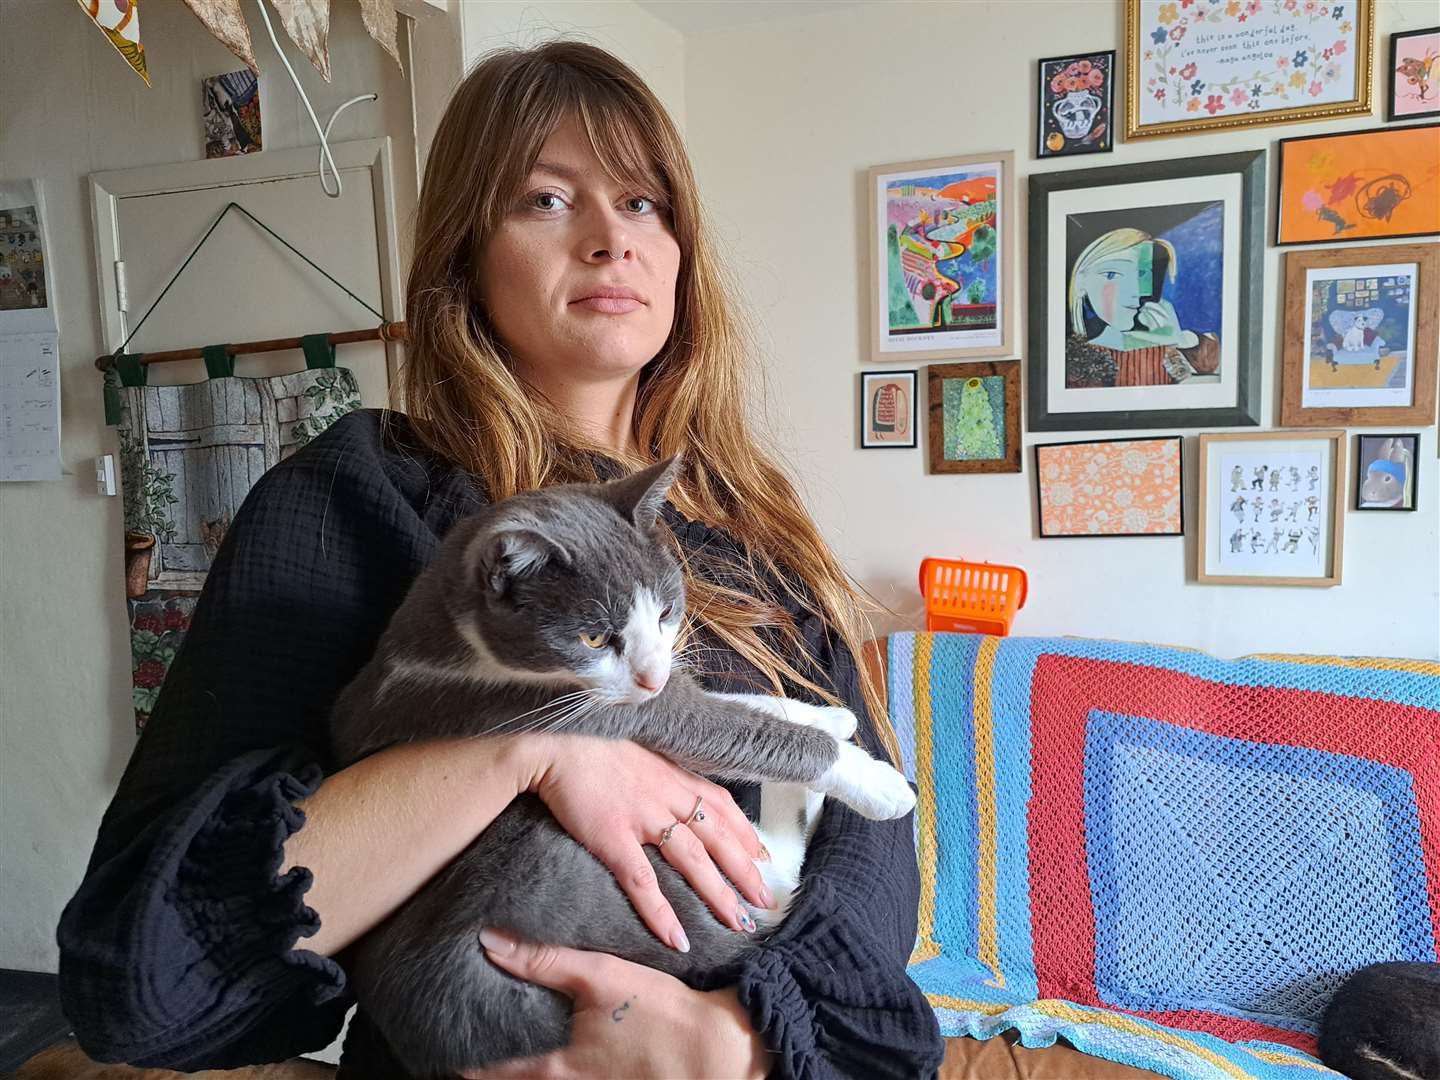 Rachel Craft with her now famous cat, Griffin